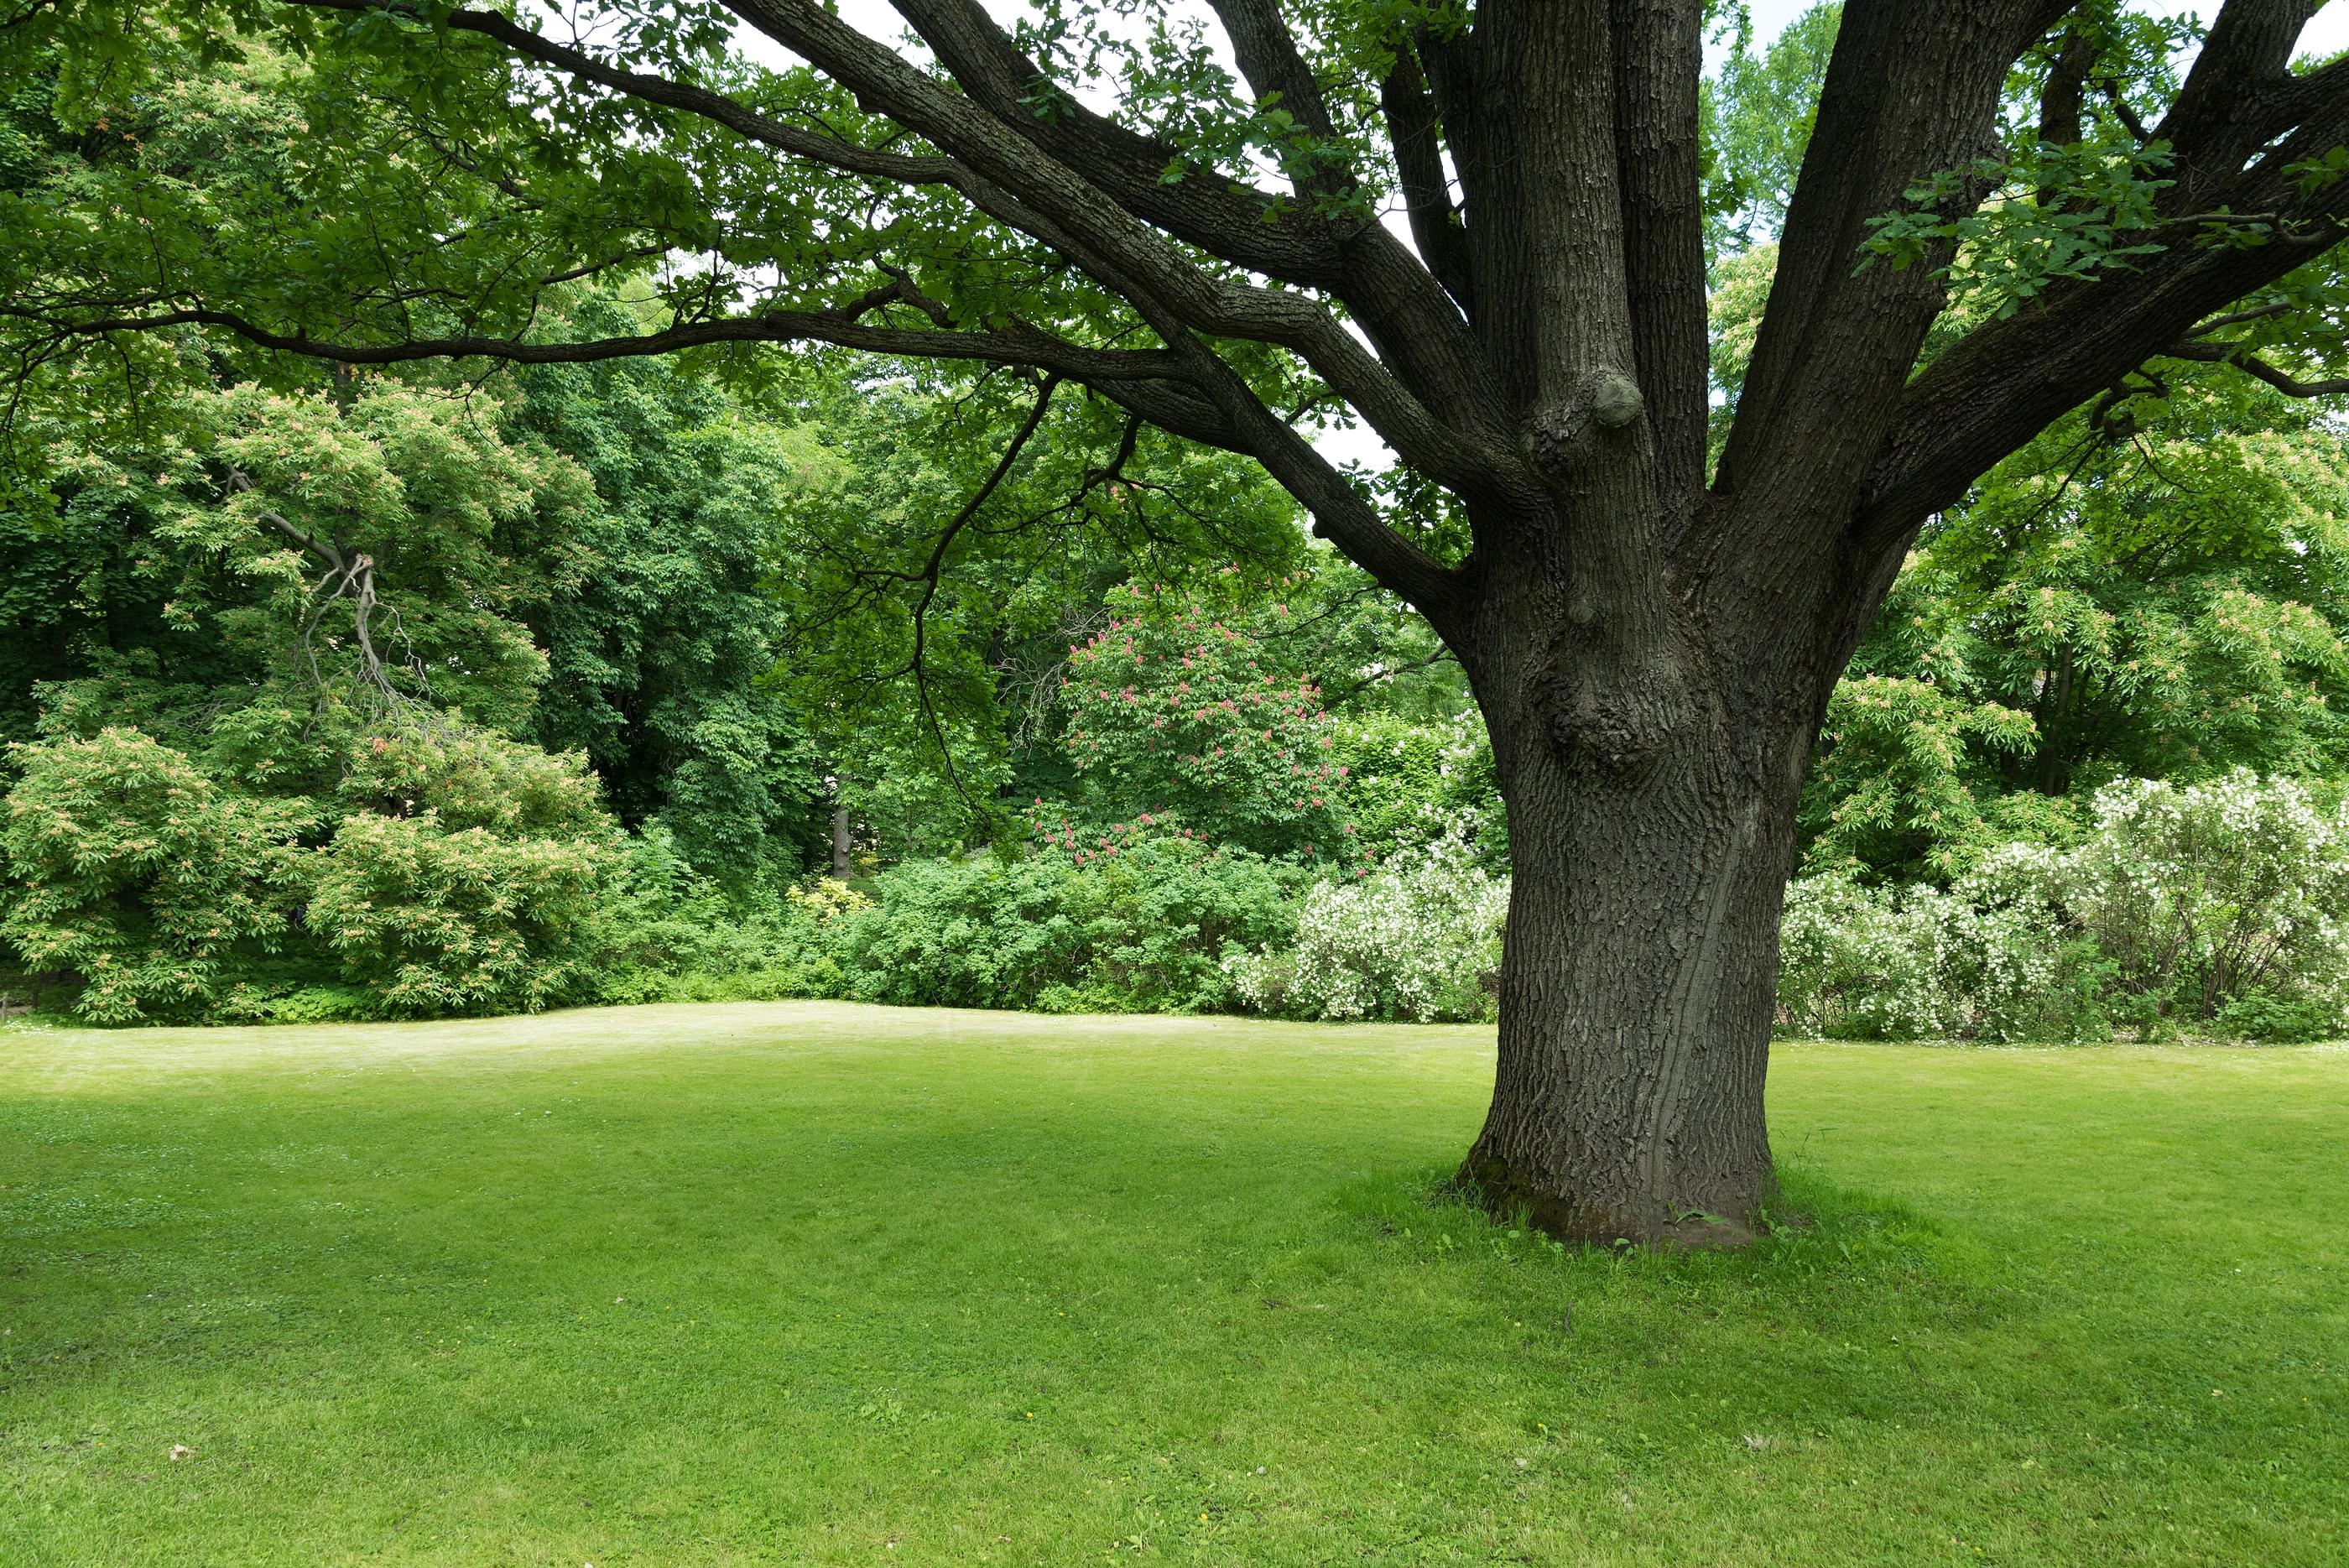 A large shade tree on green grass with more trees in the background